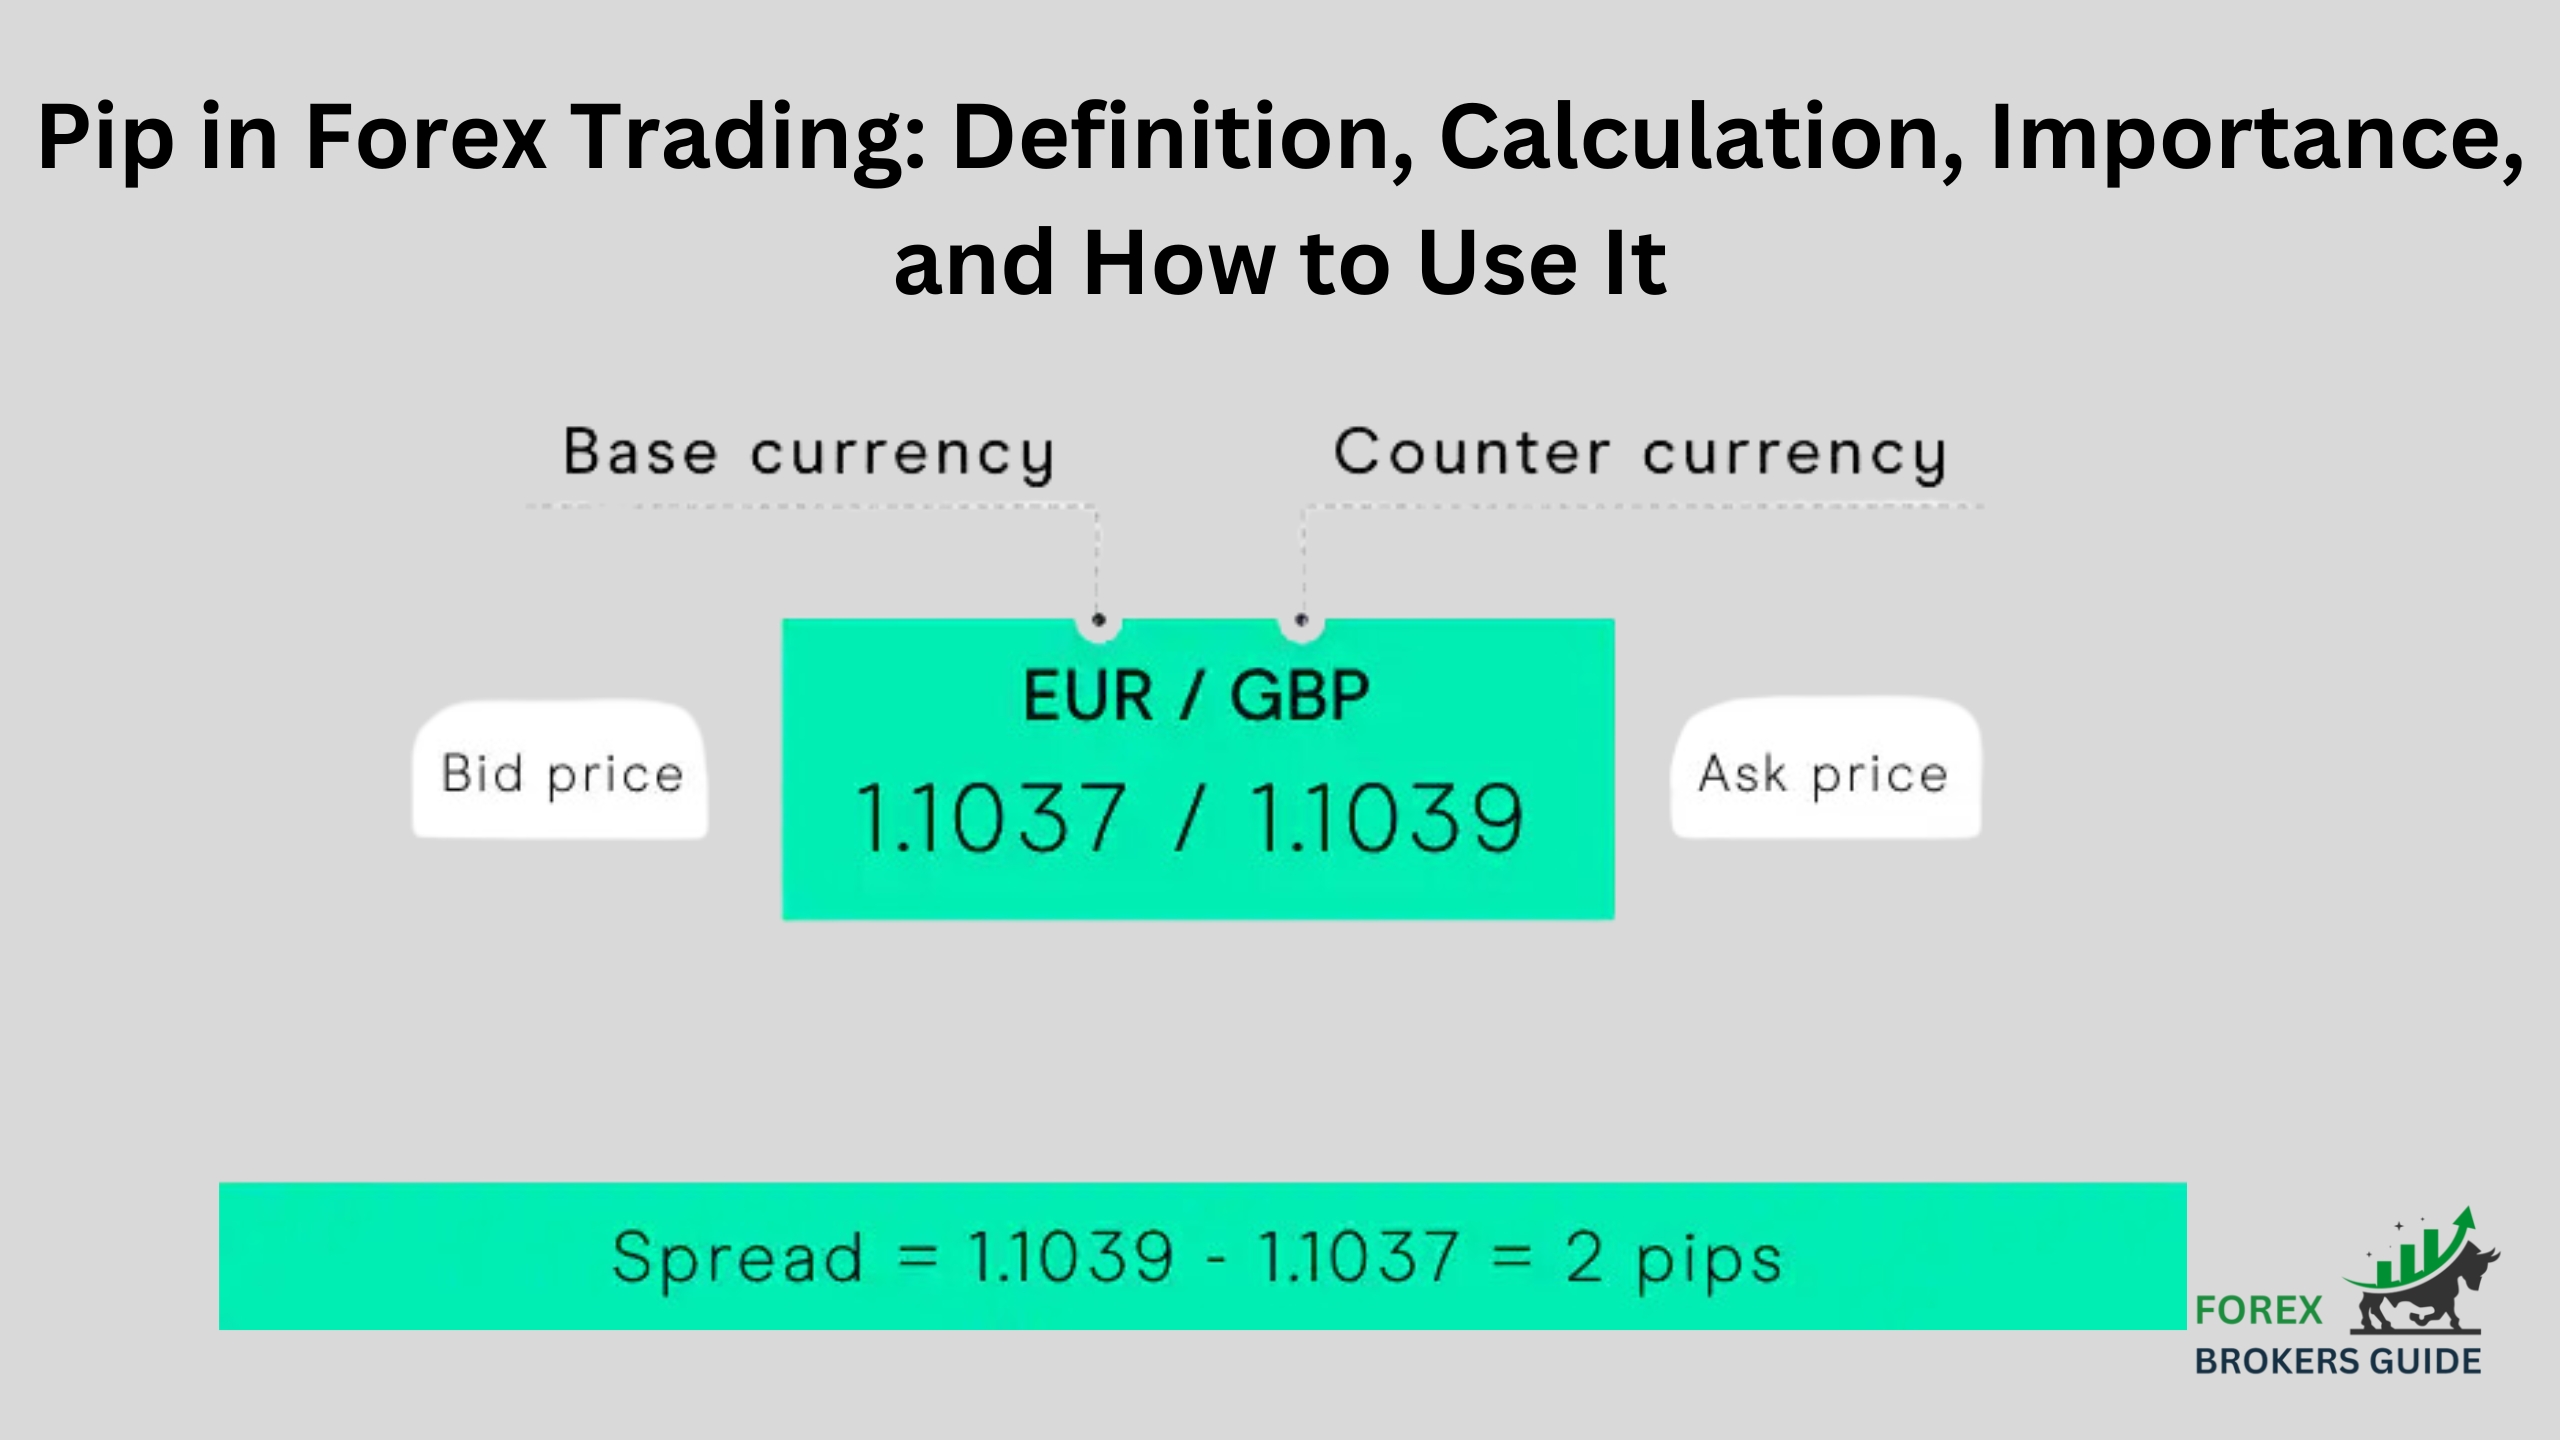 Pip in Forex Trading Definition, Calculation, Importance, and How to Use It